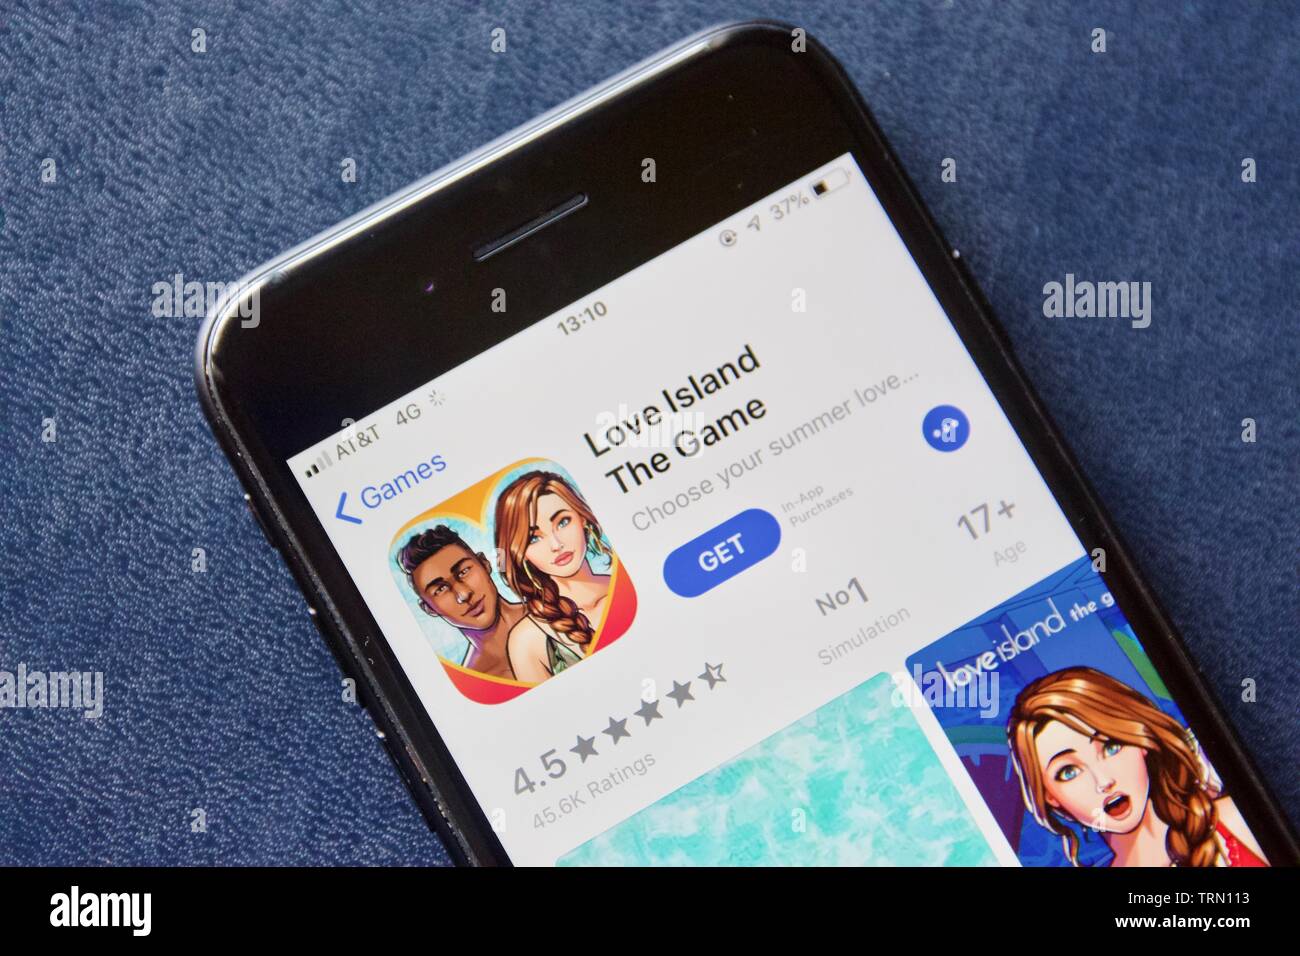 Love Island The Game, based on the popular UK reality show, on an iPhone Stock Photo